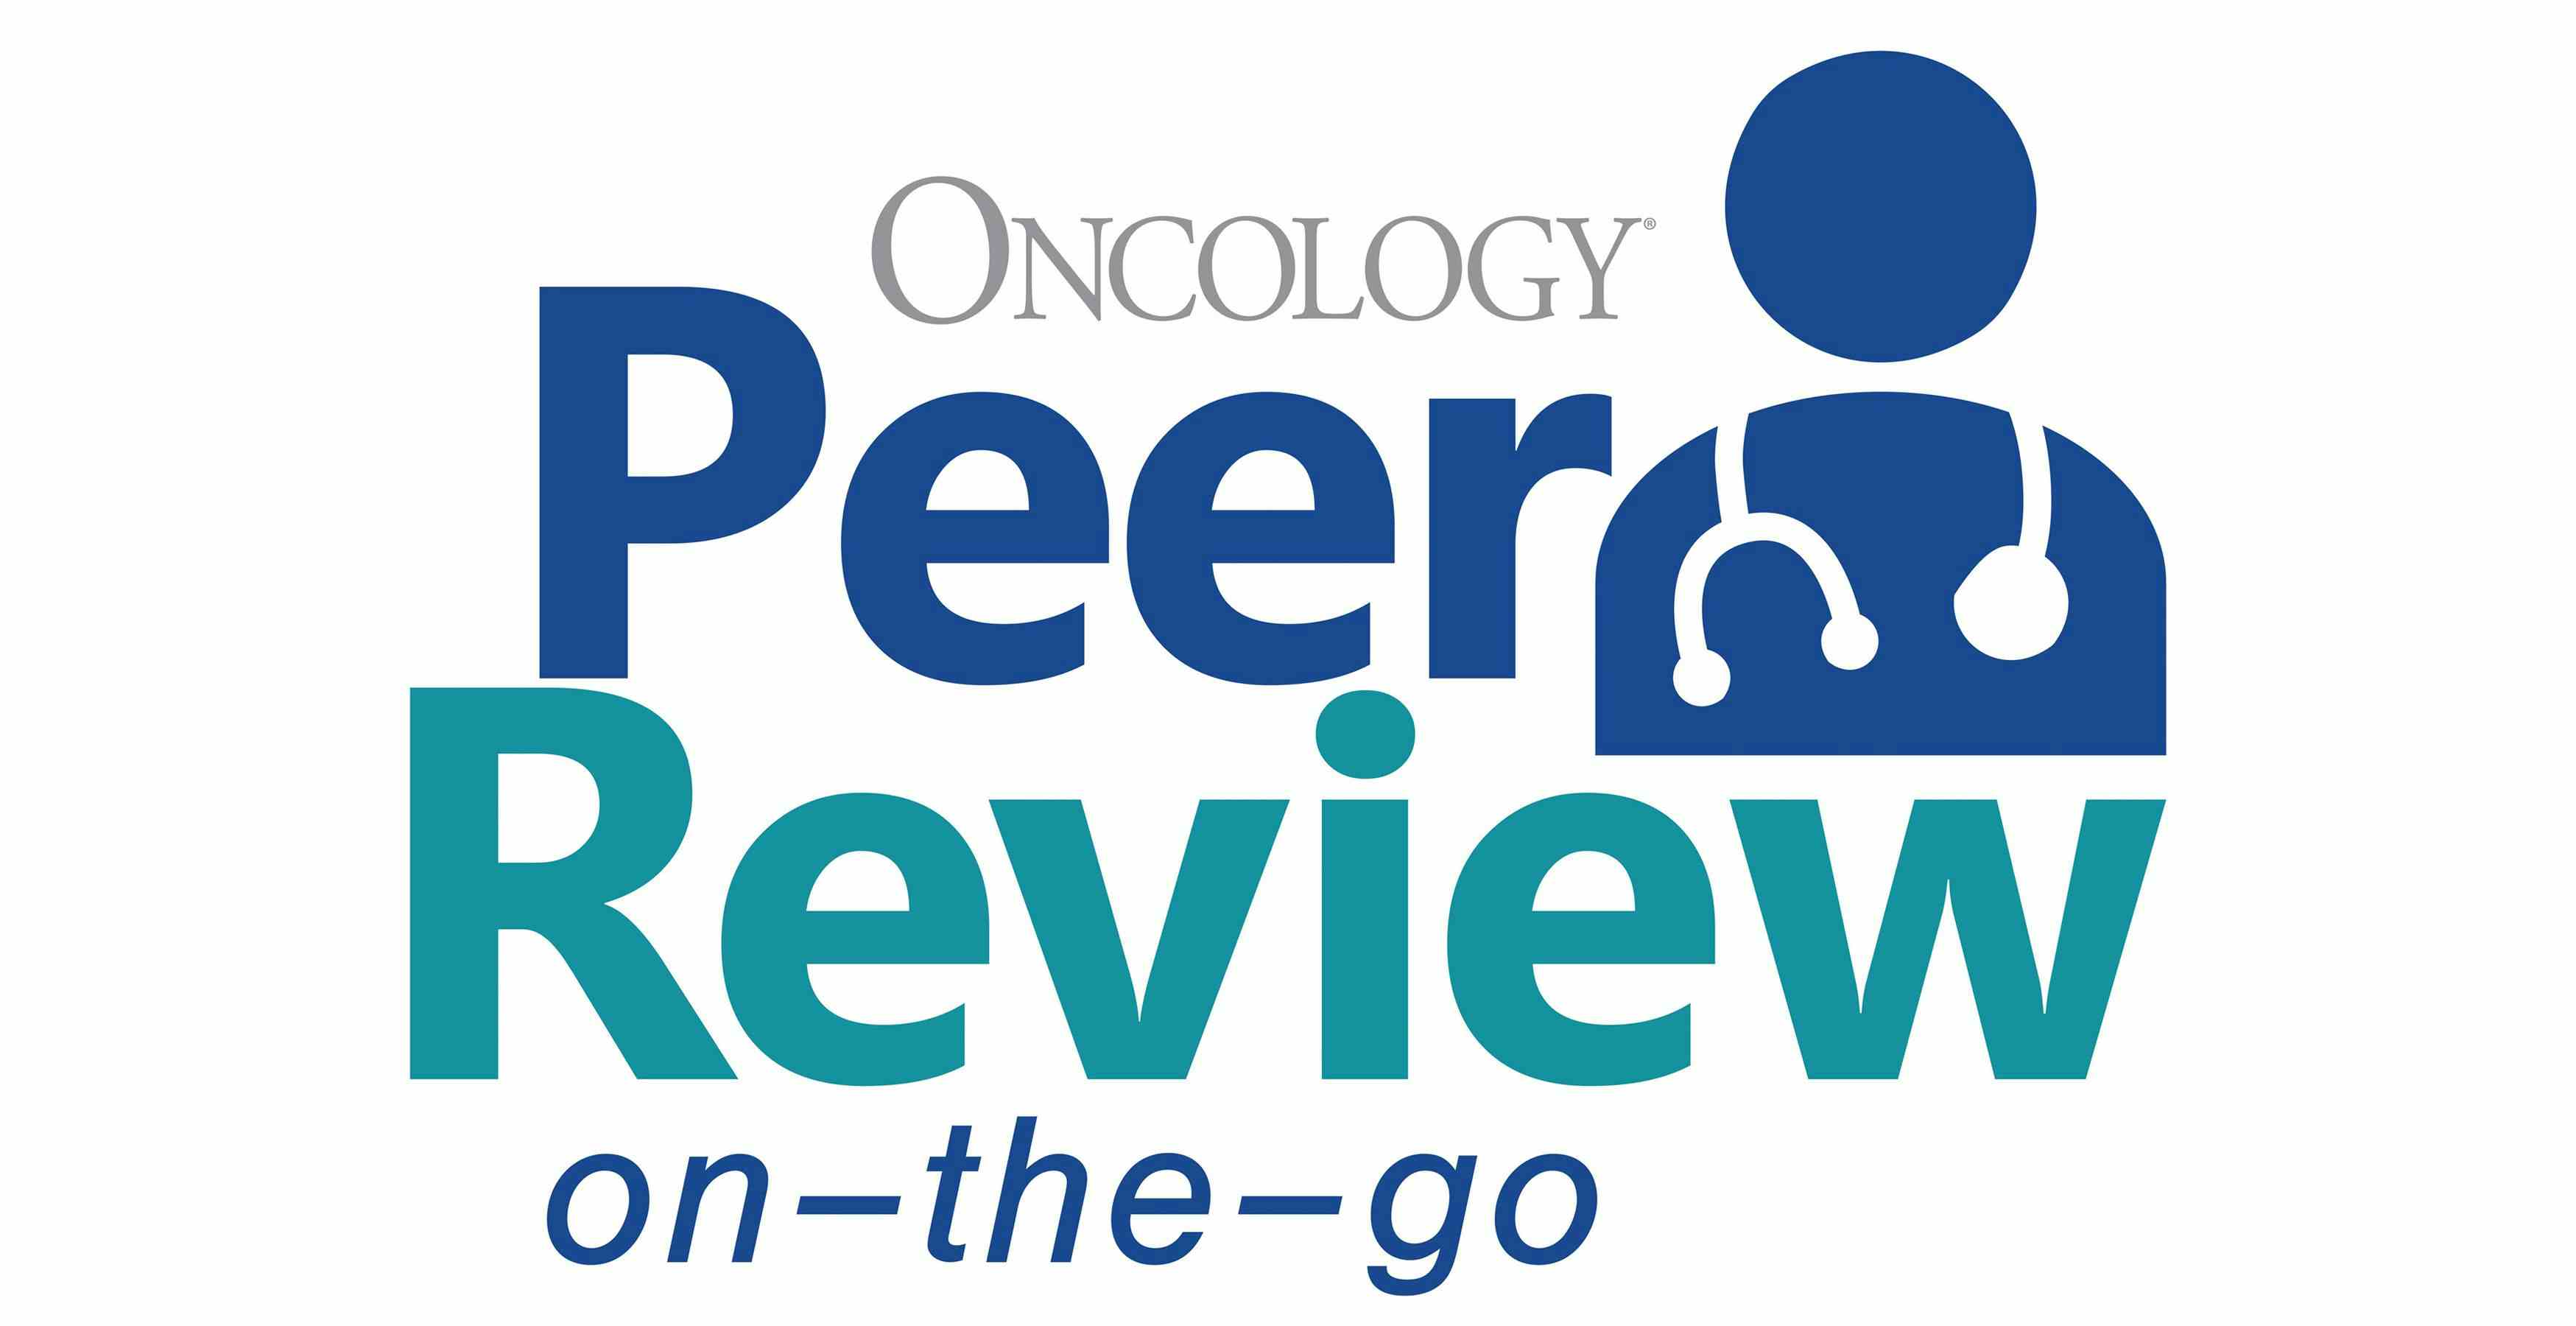 On this episode of CancerNetwork’s podcast, Emily Smith, MD, discussed a patient case of basal cell carcinoma she and colleagues published in the journal ONCOLOGY.